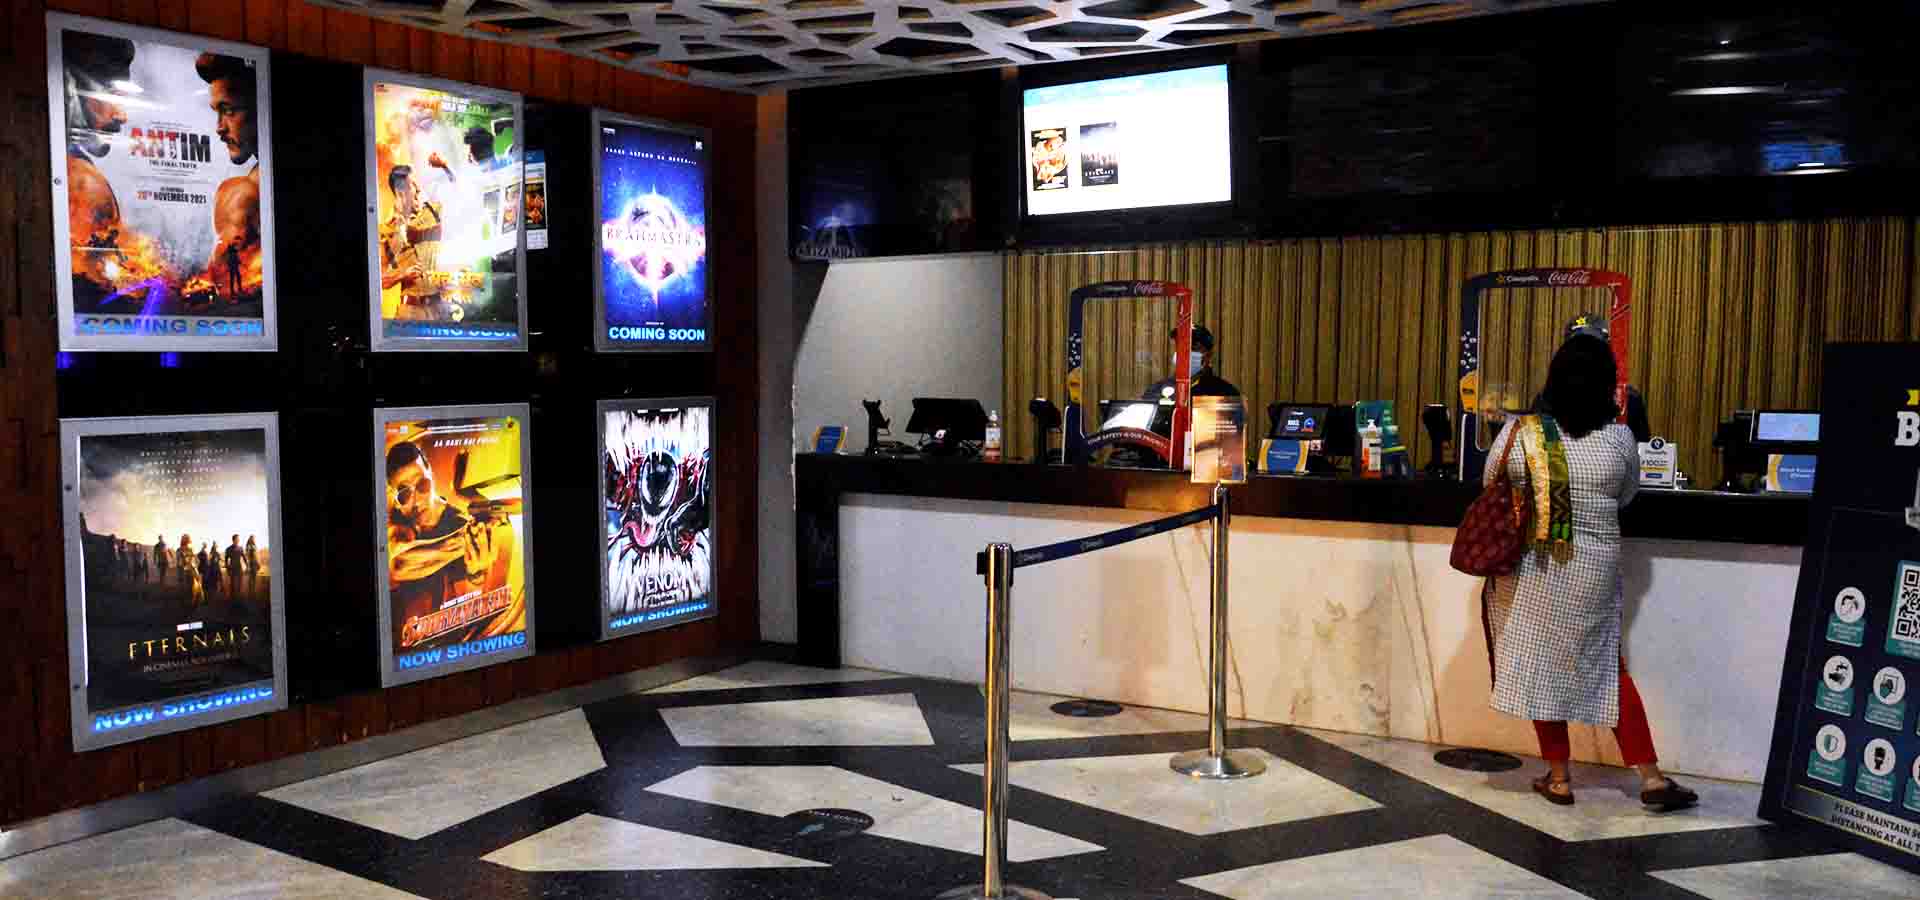 Cinepolis store photos in mall